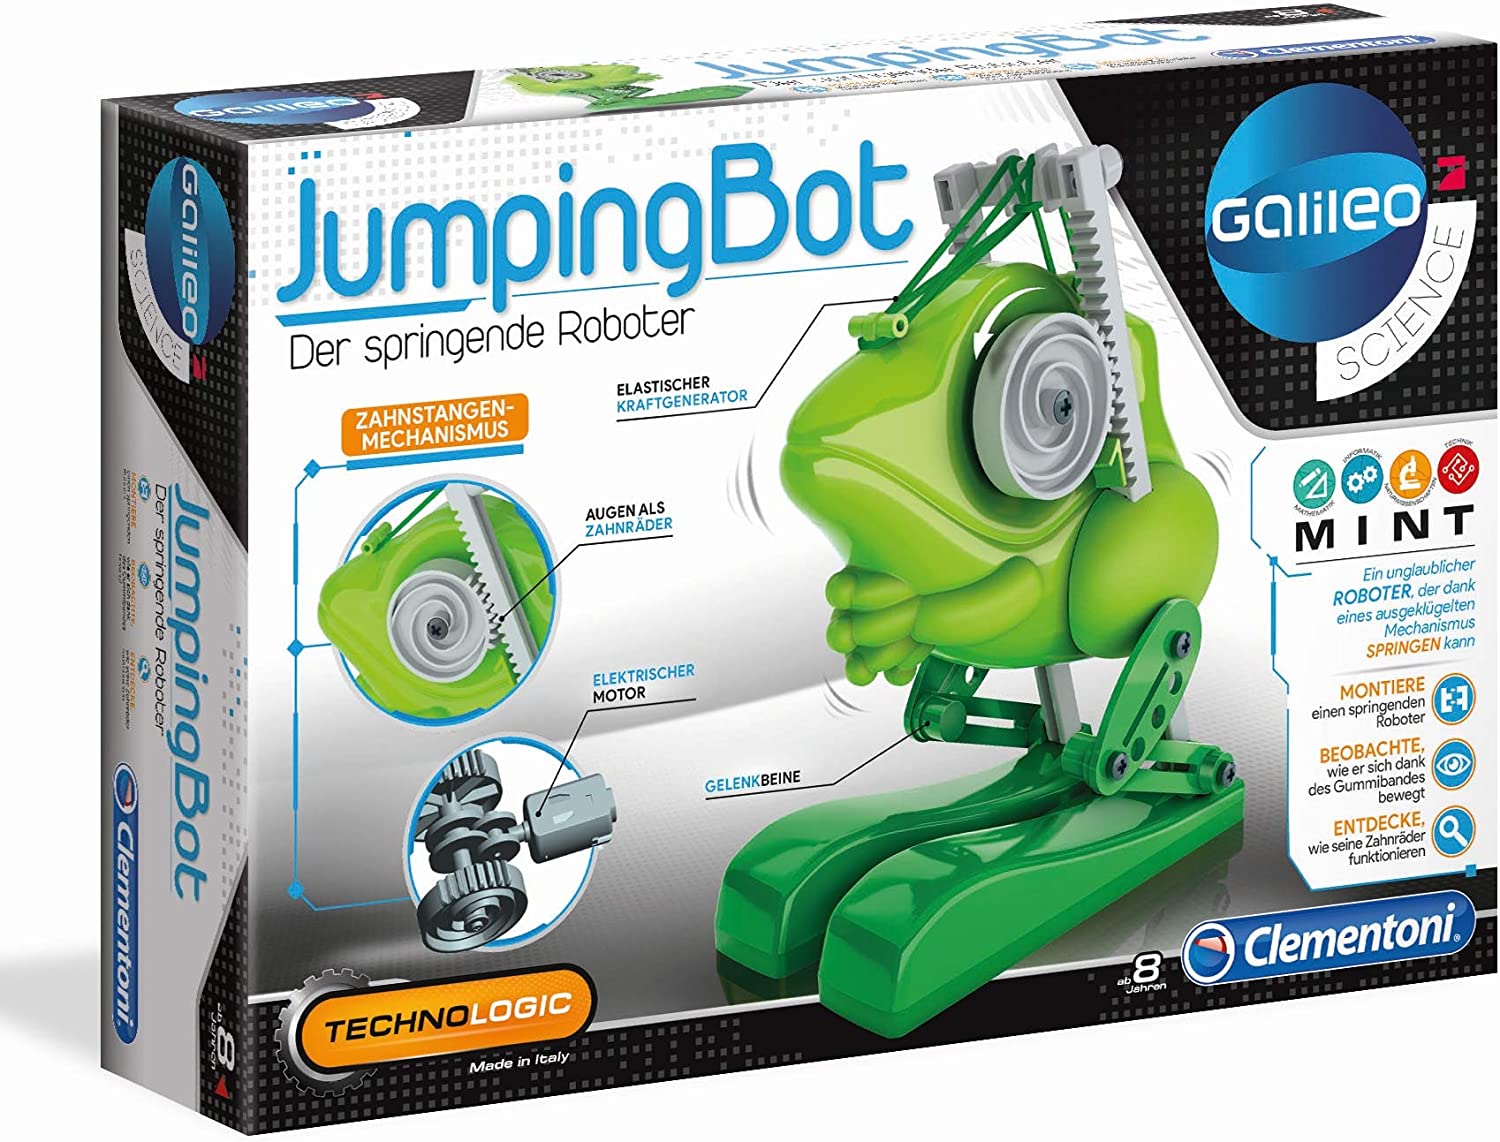 http://honestforwarder.com/uploads/product/fKLSyLN3J5-clementoni-galileo-science-robot-suction-robot-robotics-for-small-engineers-entry-to-electronics-high-tech-for-school-children-toys-for-children-over-8-years0.jpg